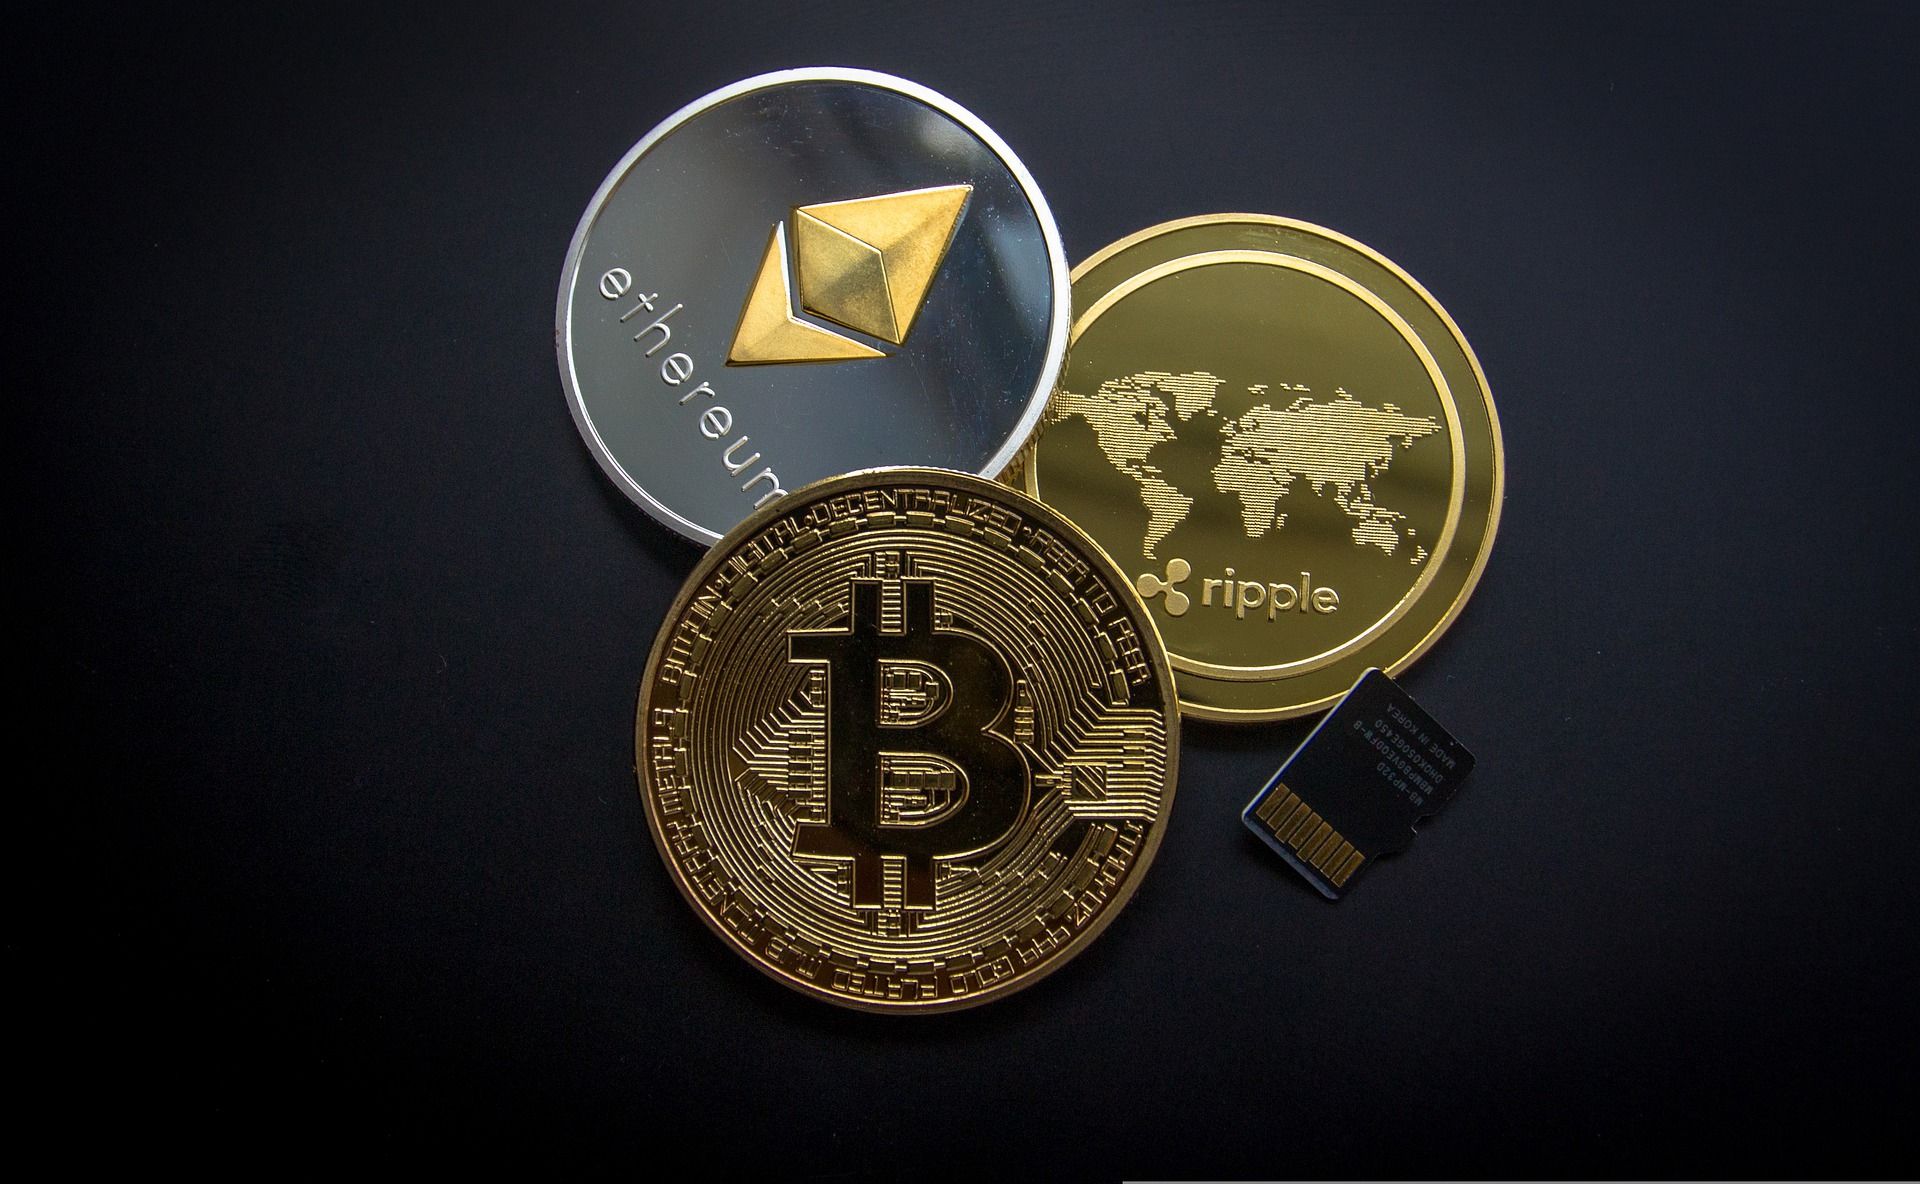 Top 5 cryptocurrencies of the day: Bitcoin down, FTX Token trends at no. 1